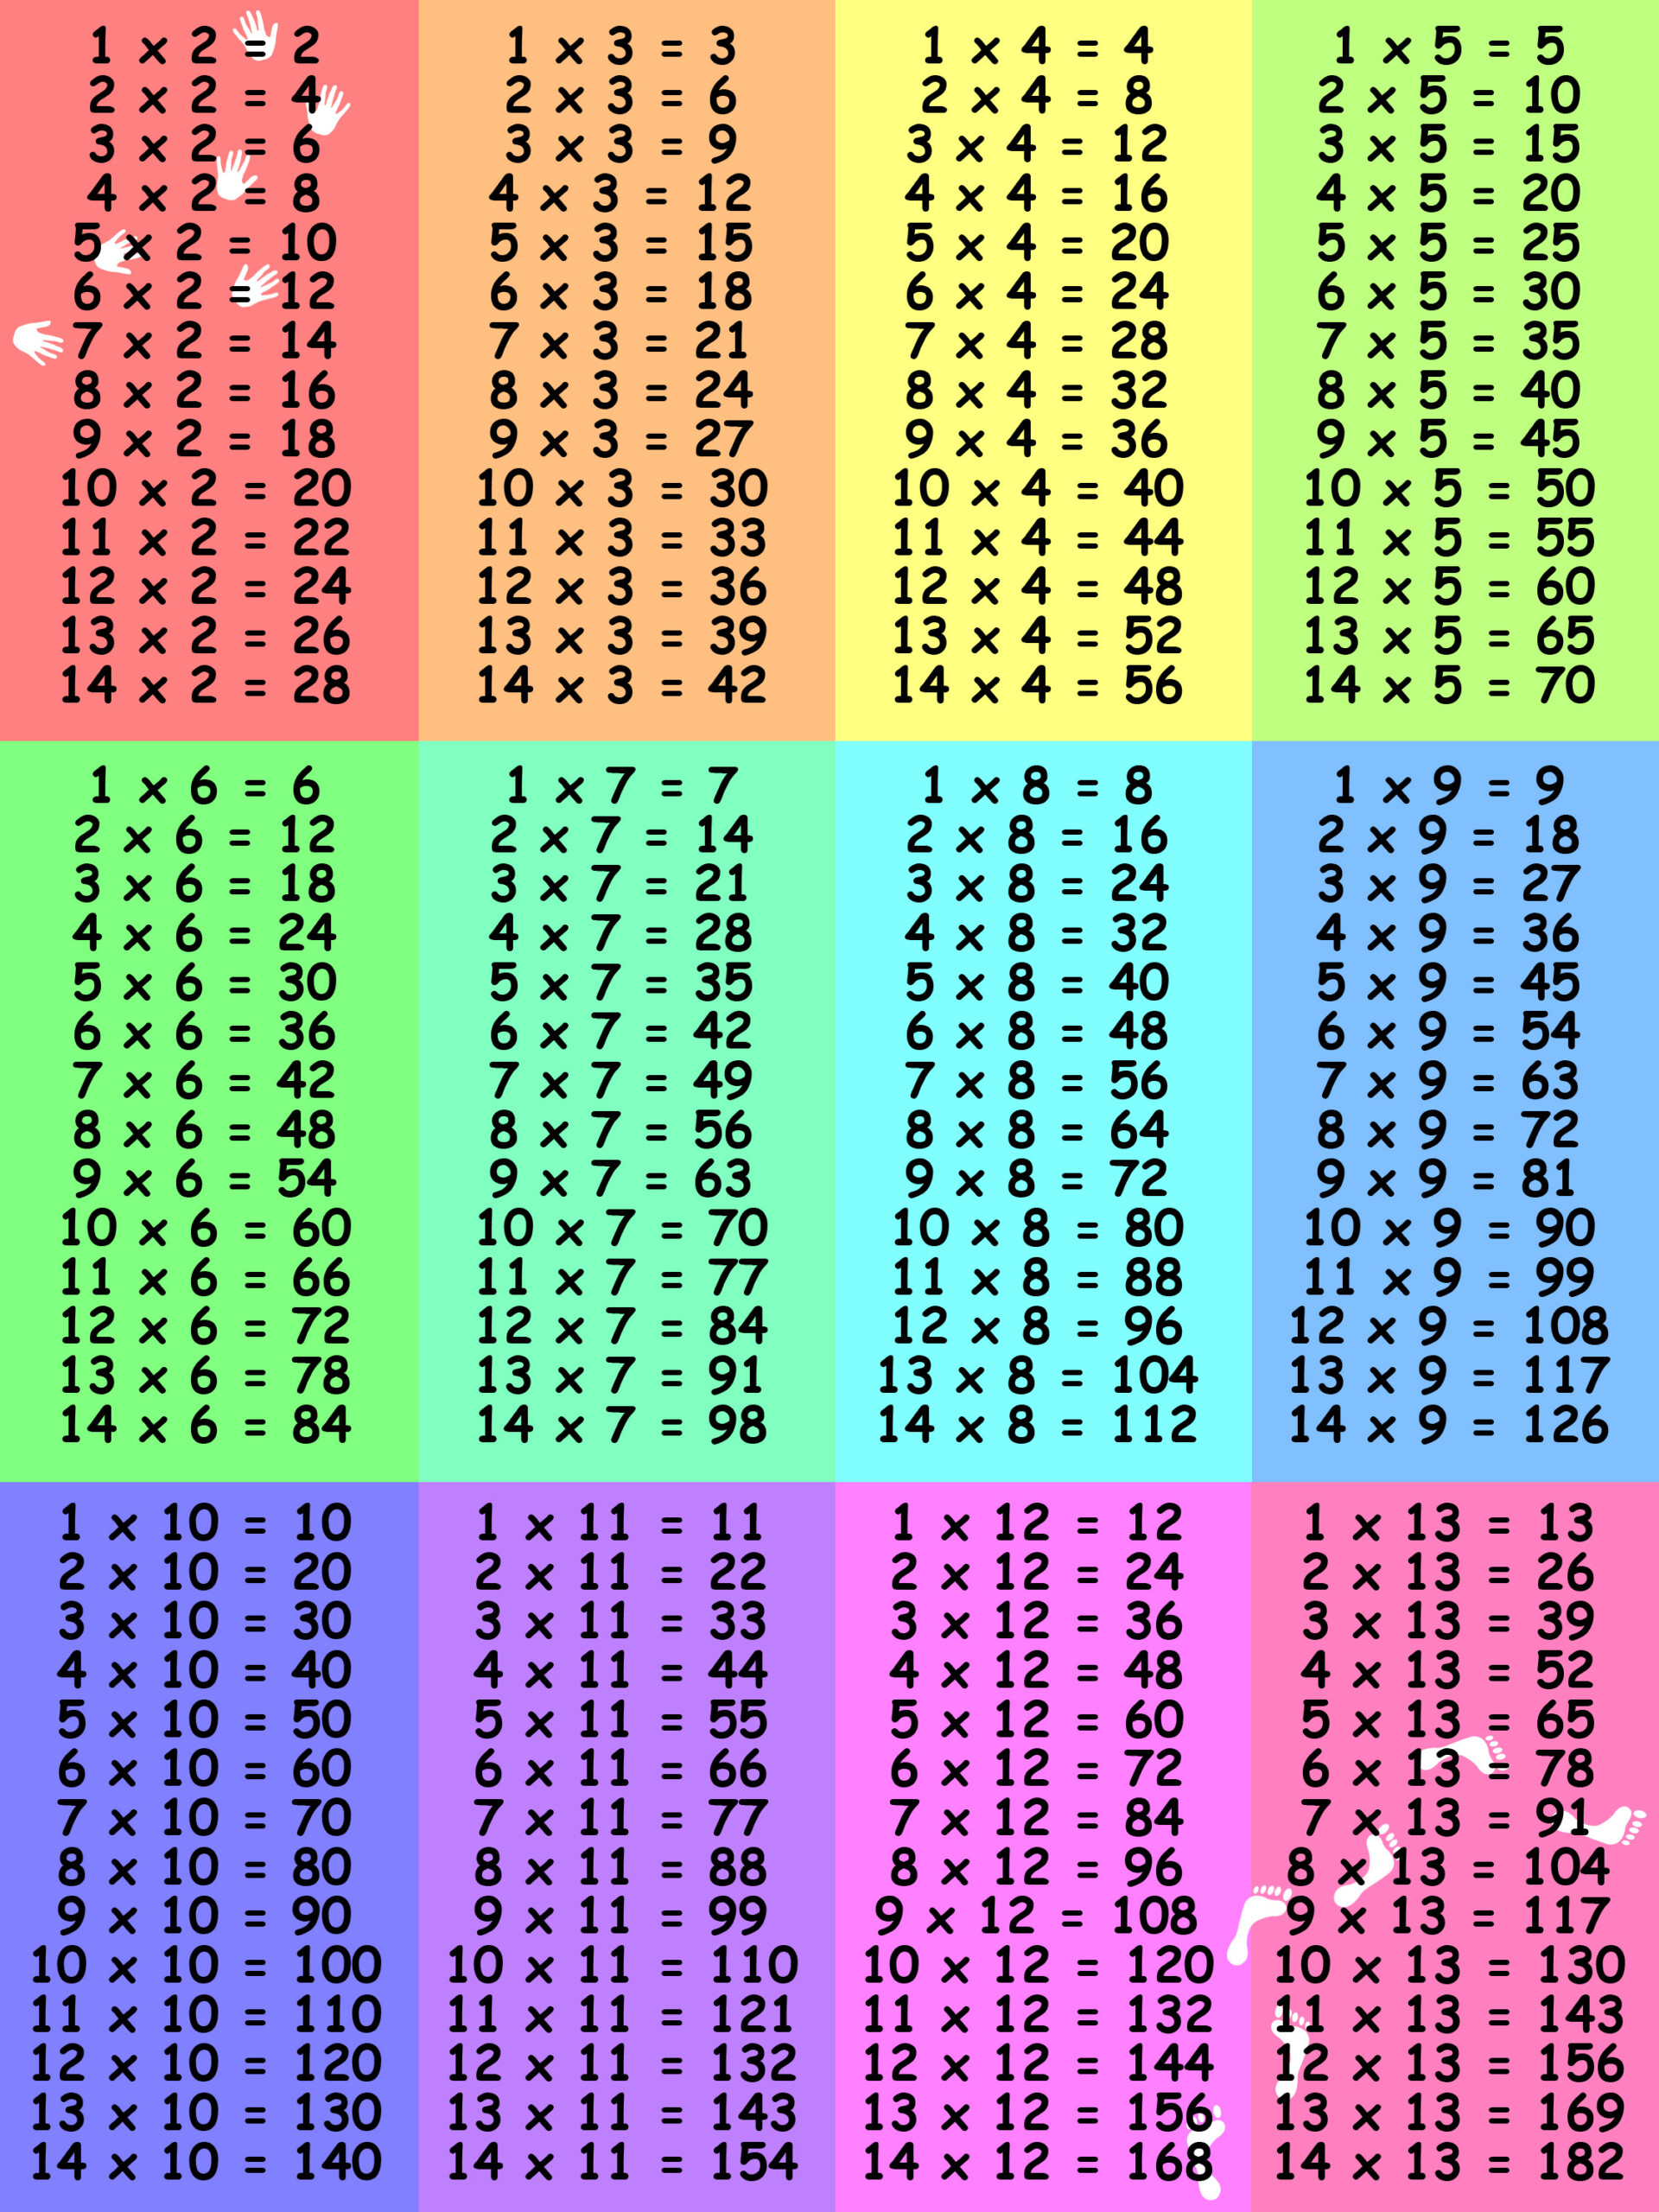 4 times tables for kids